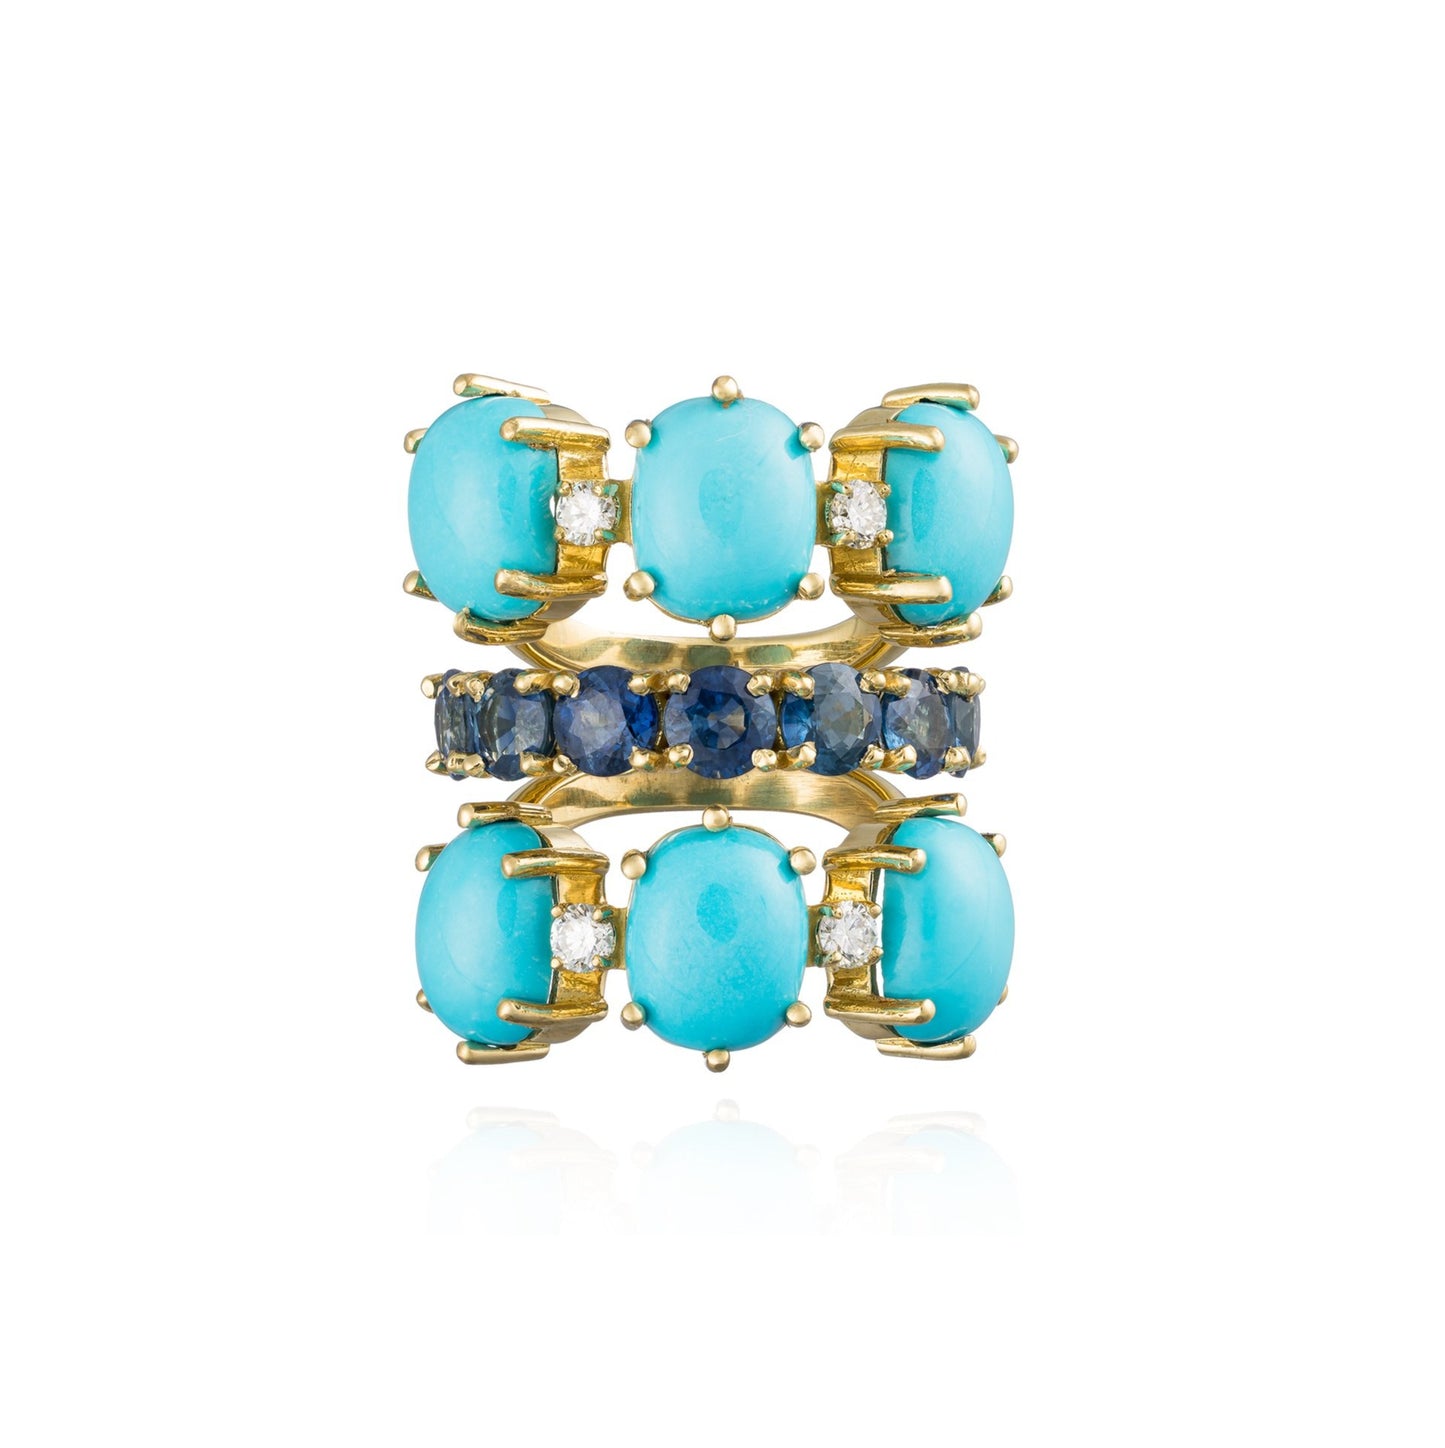 18K Yellow Gold Ring with Turquoise Cabochon & Blue Sapphires